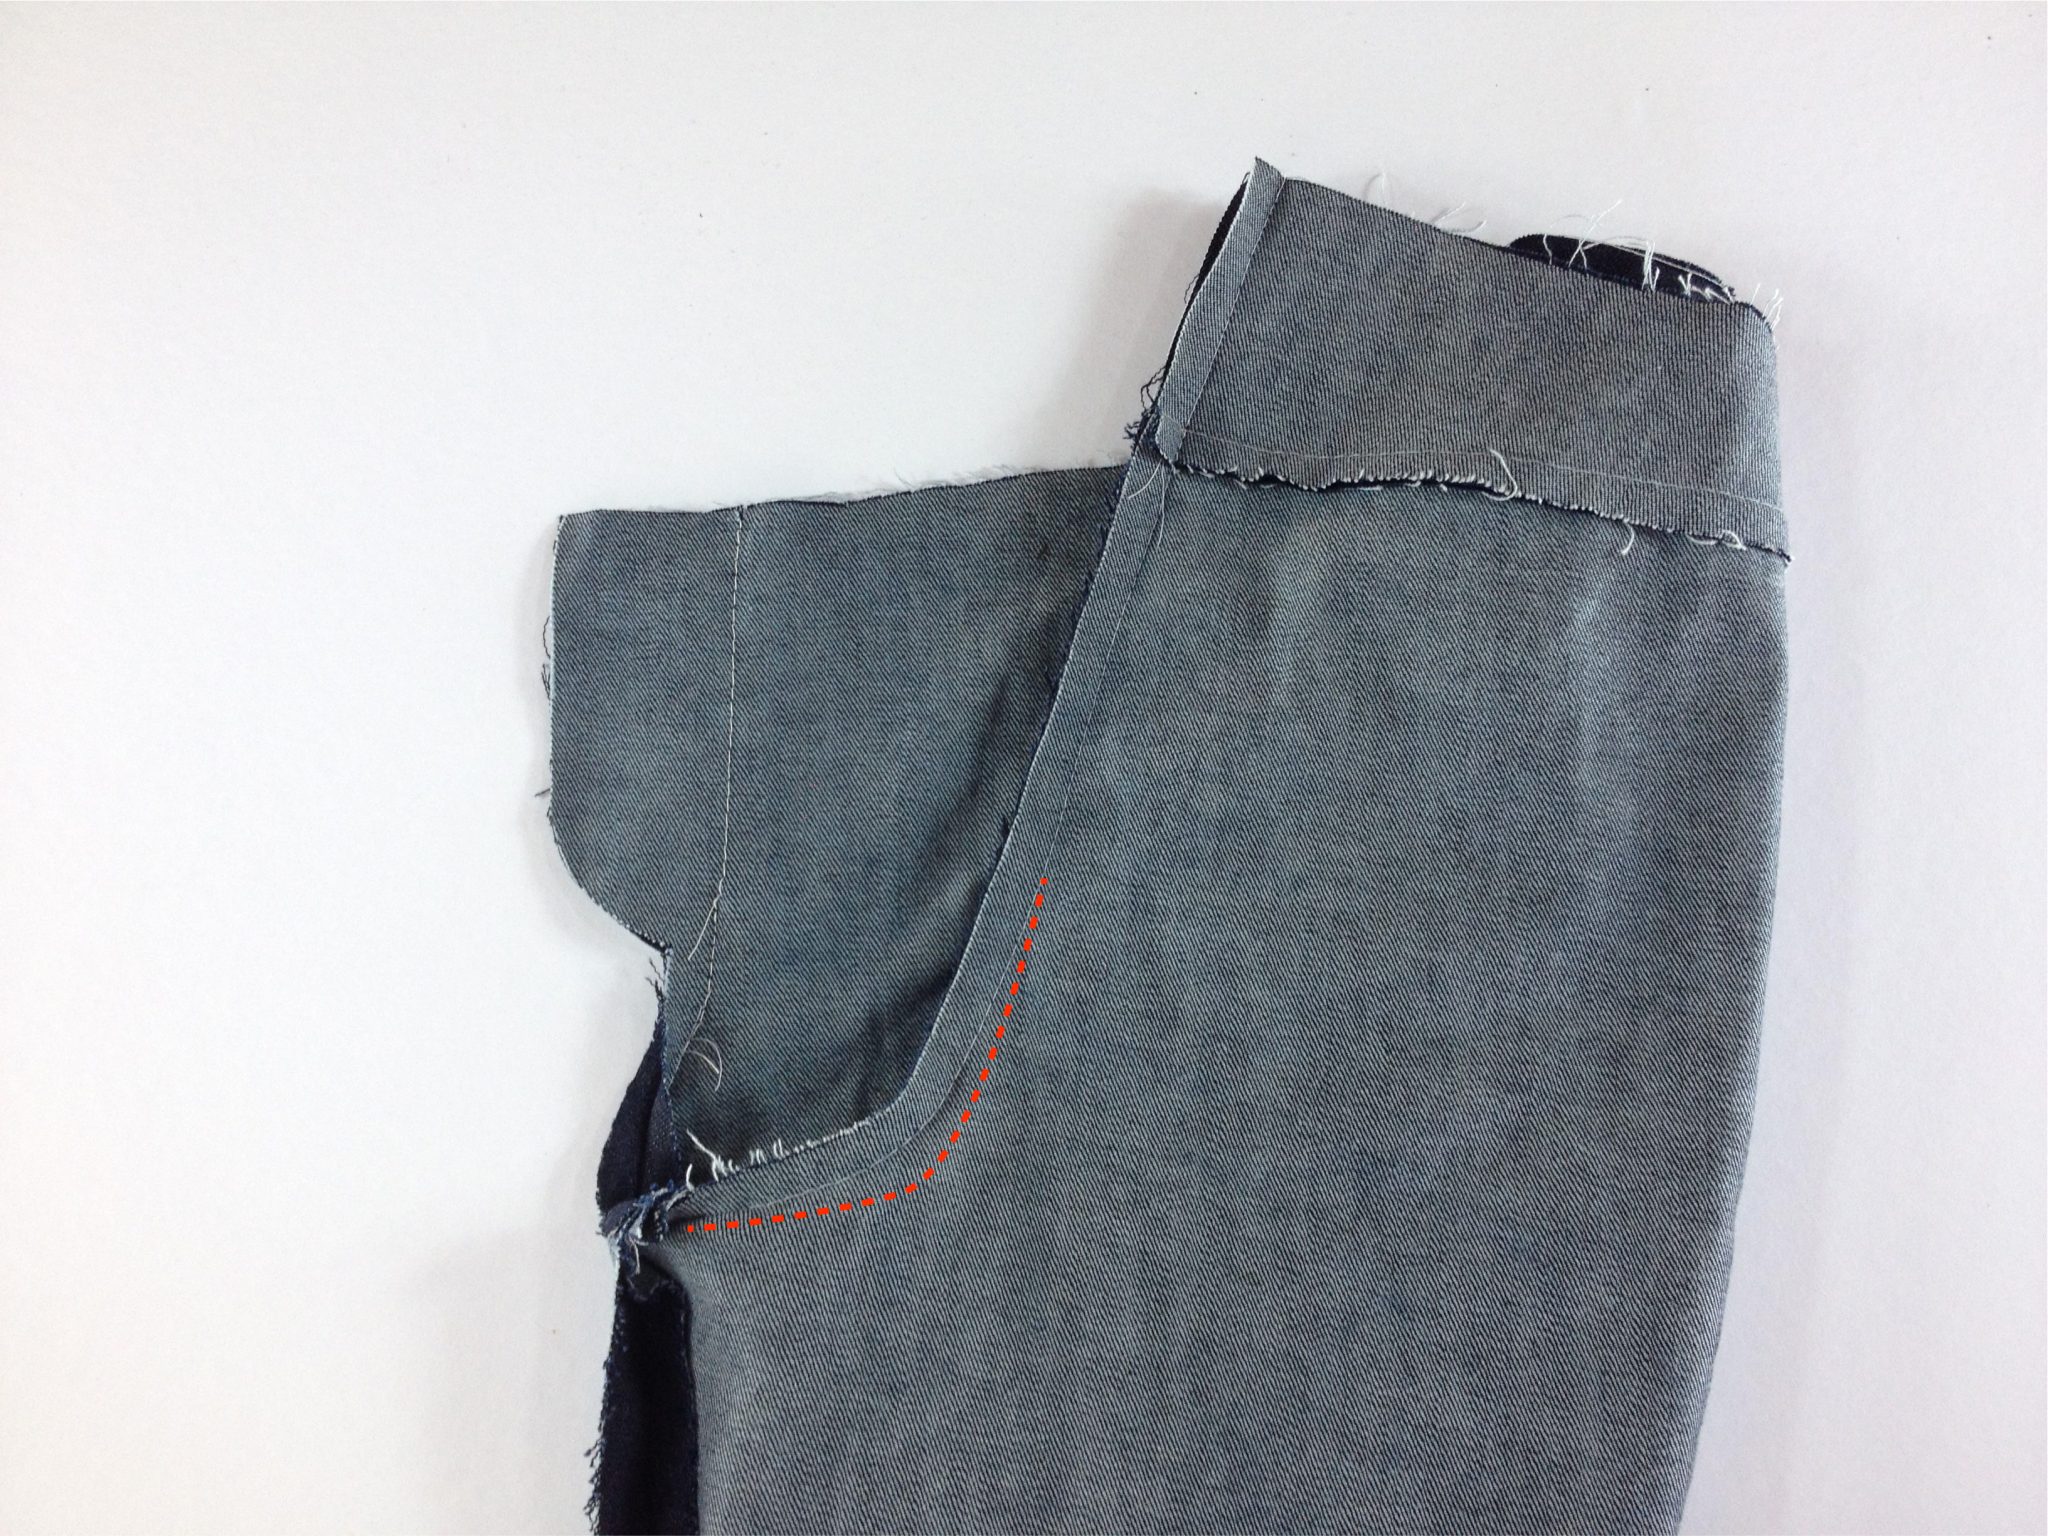 Jeans Part 3: Test Stitching and Tension Adjustments